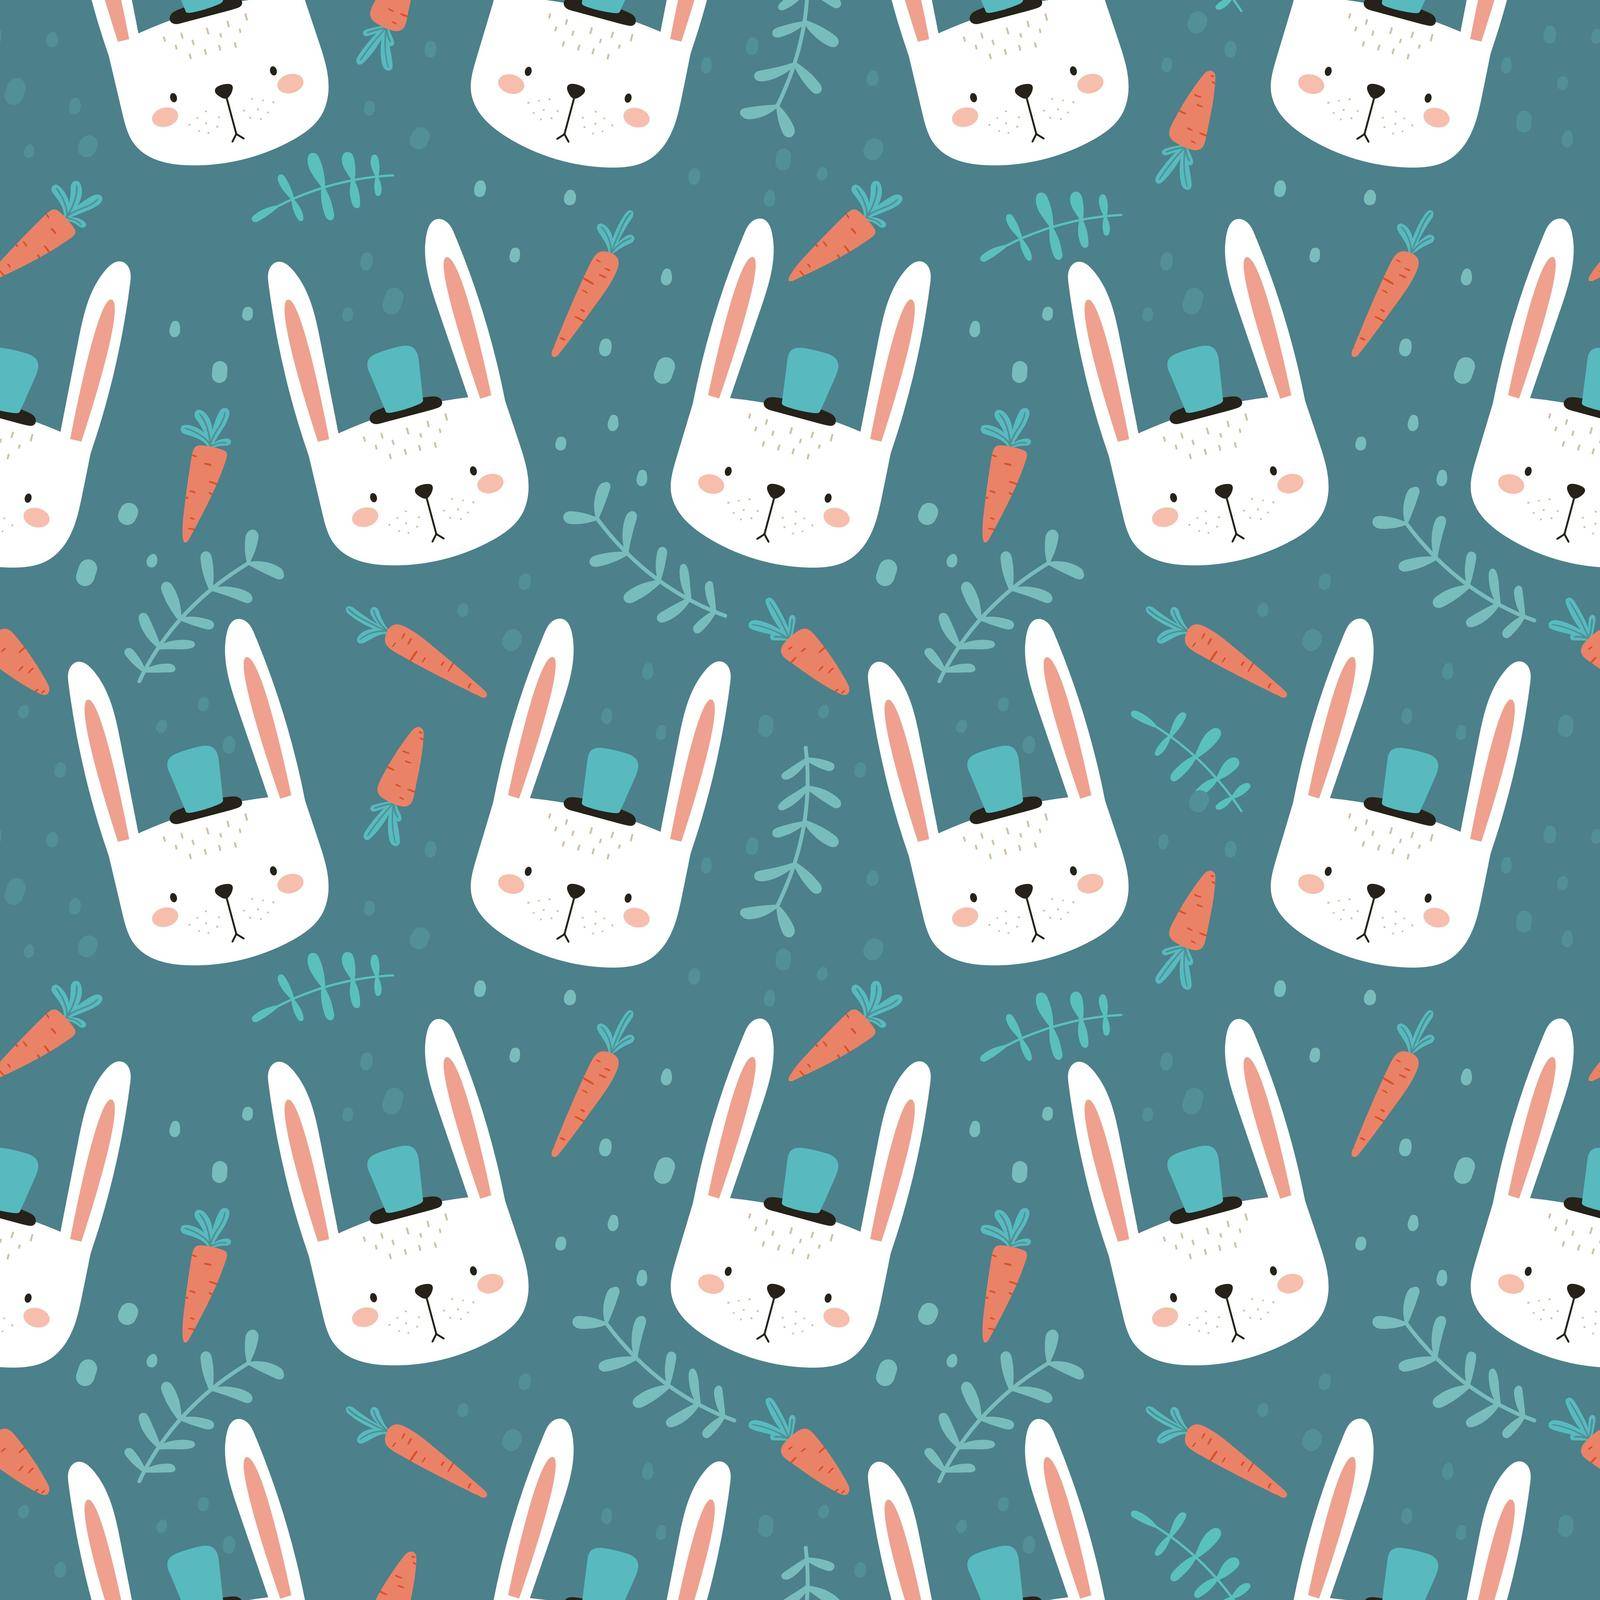 Rabbits seamless pattern. Funny hand-drawn rabbits and carrots in a simple childish style on a dark green background.